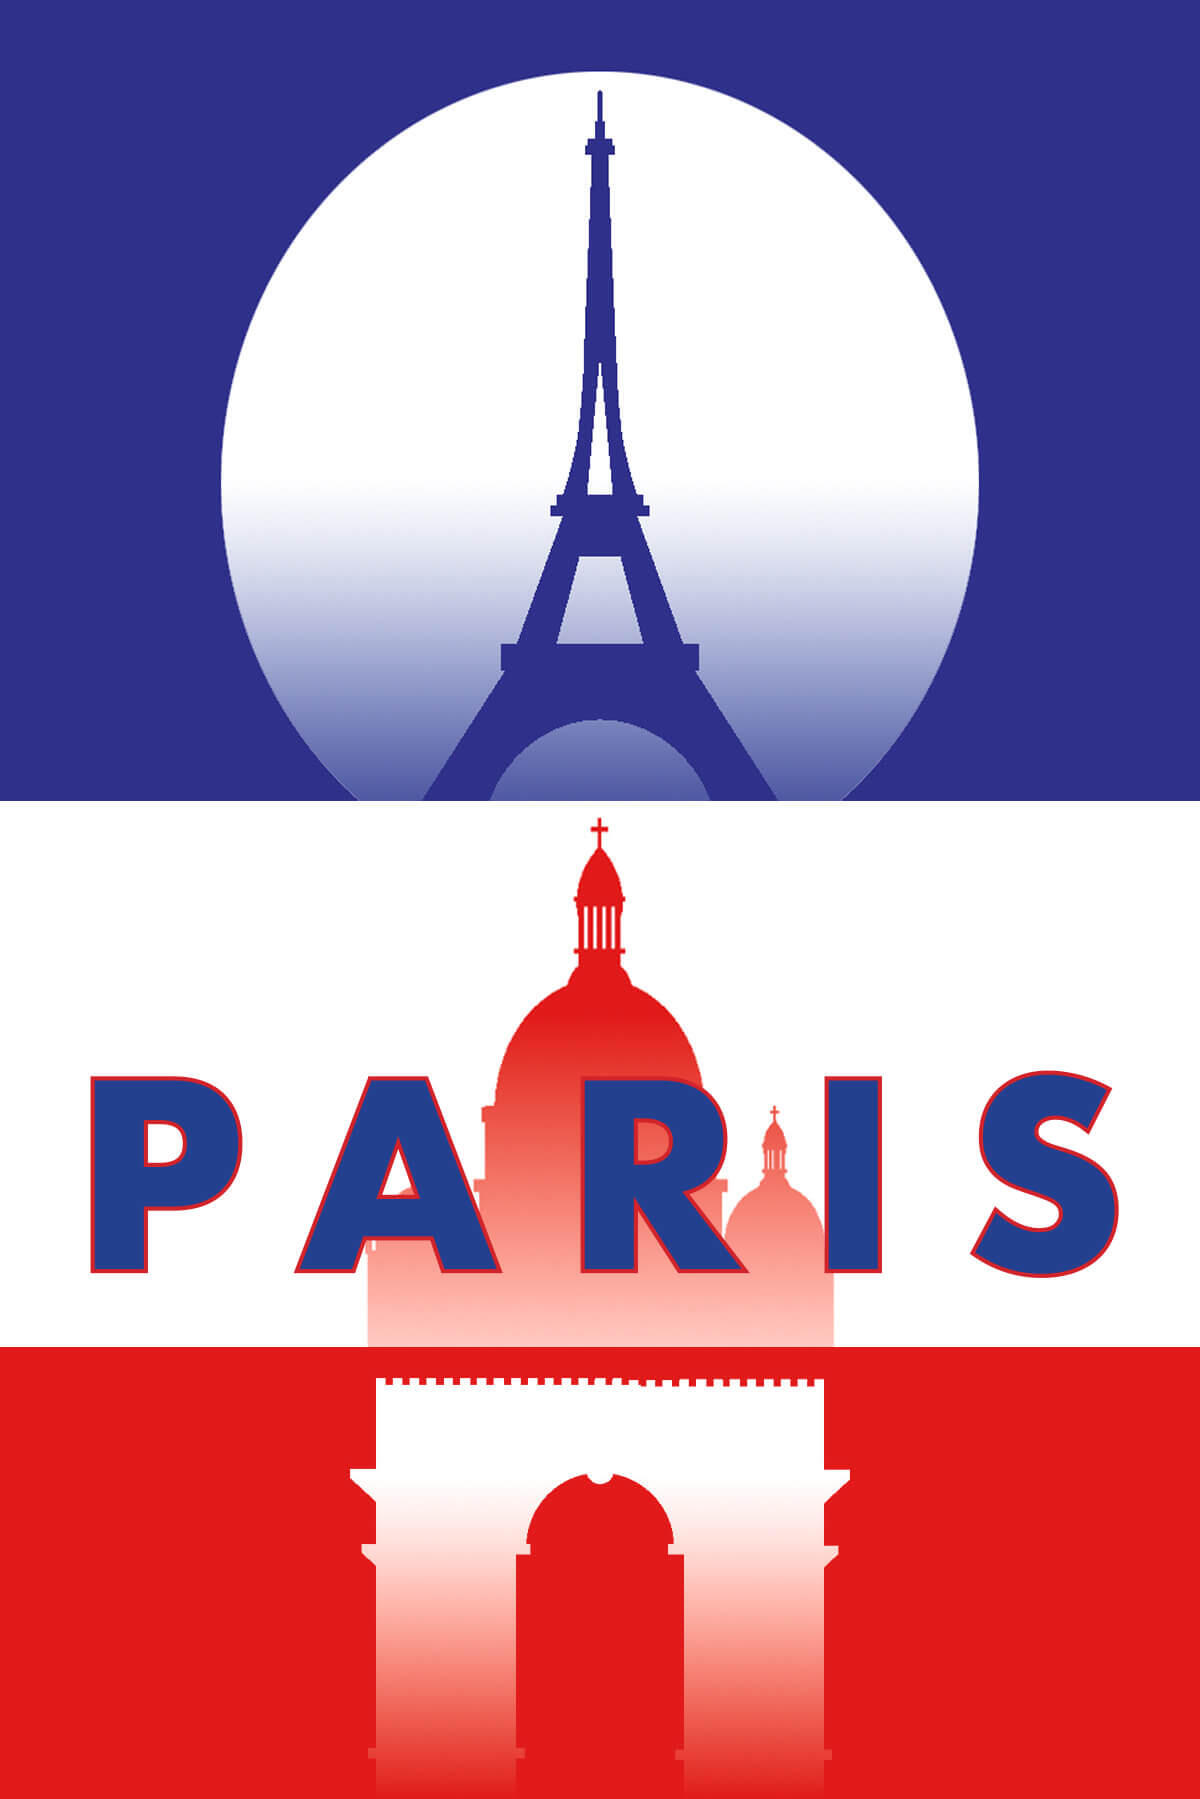 Paris travel poster showing Eiffel Tower and other landmarks.